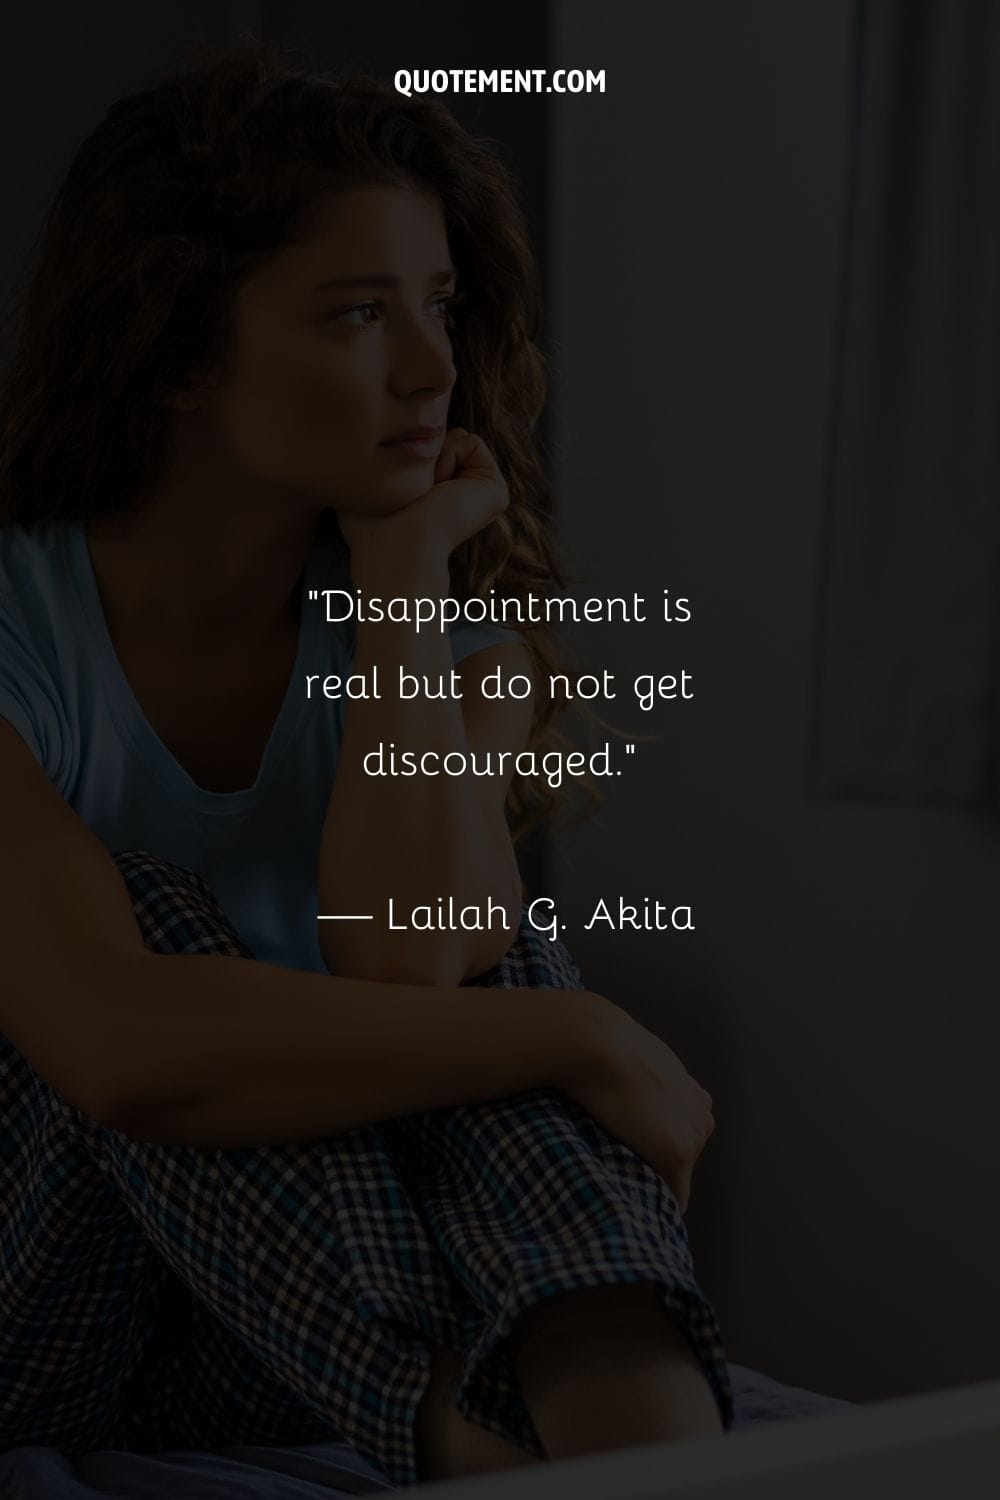 Disappointment is real but do not get discouraged